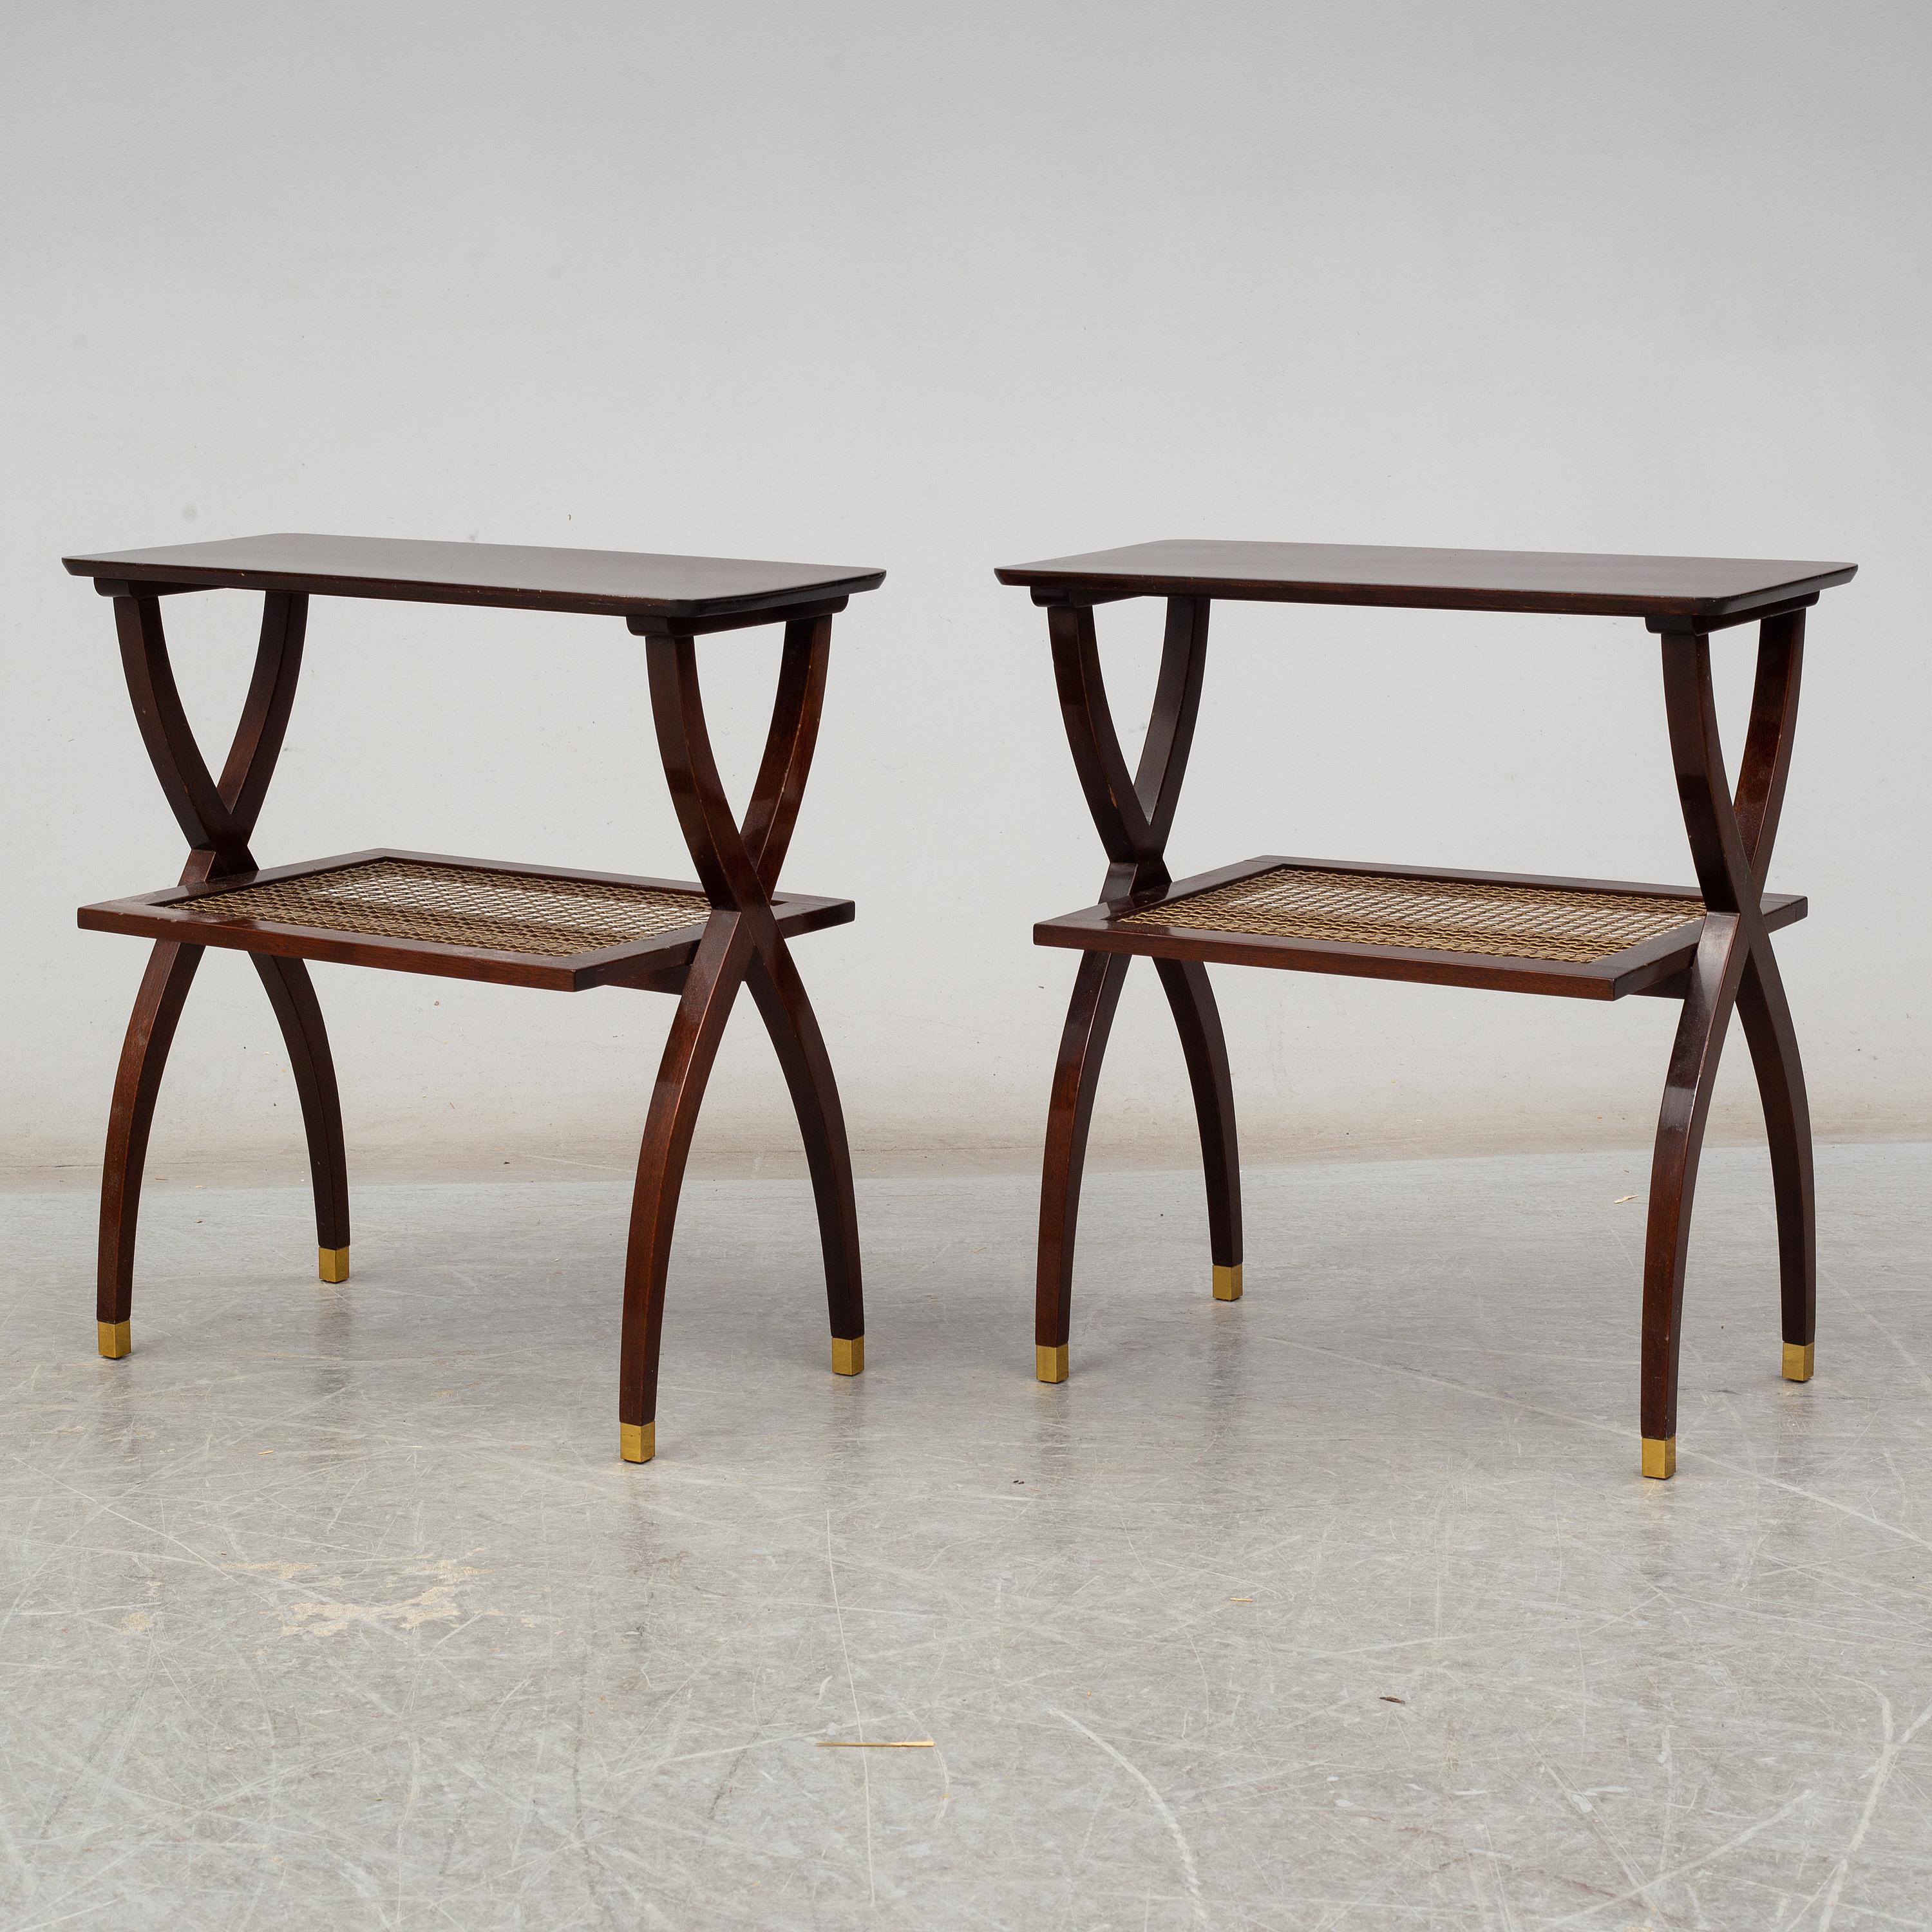 A pair of mid-20th century tables, wood with a woven brass shelves, brass detailing on feet.

Top is 9.25